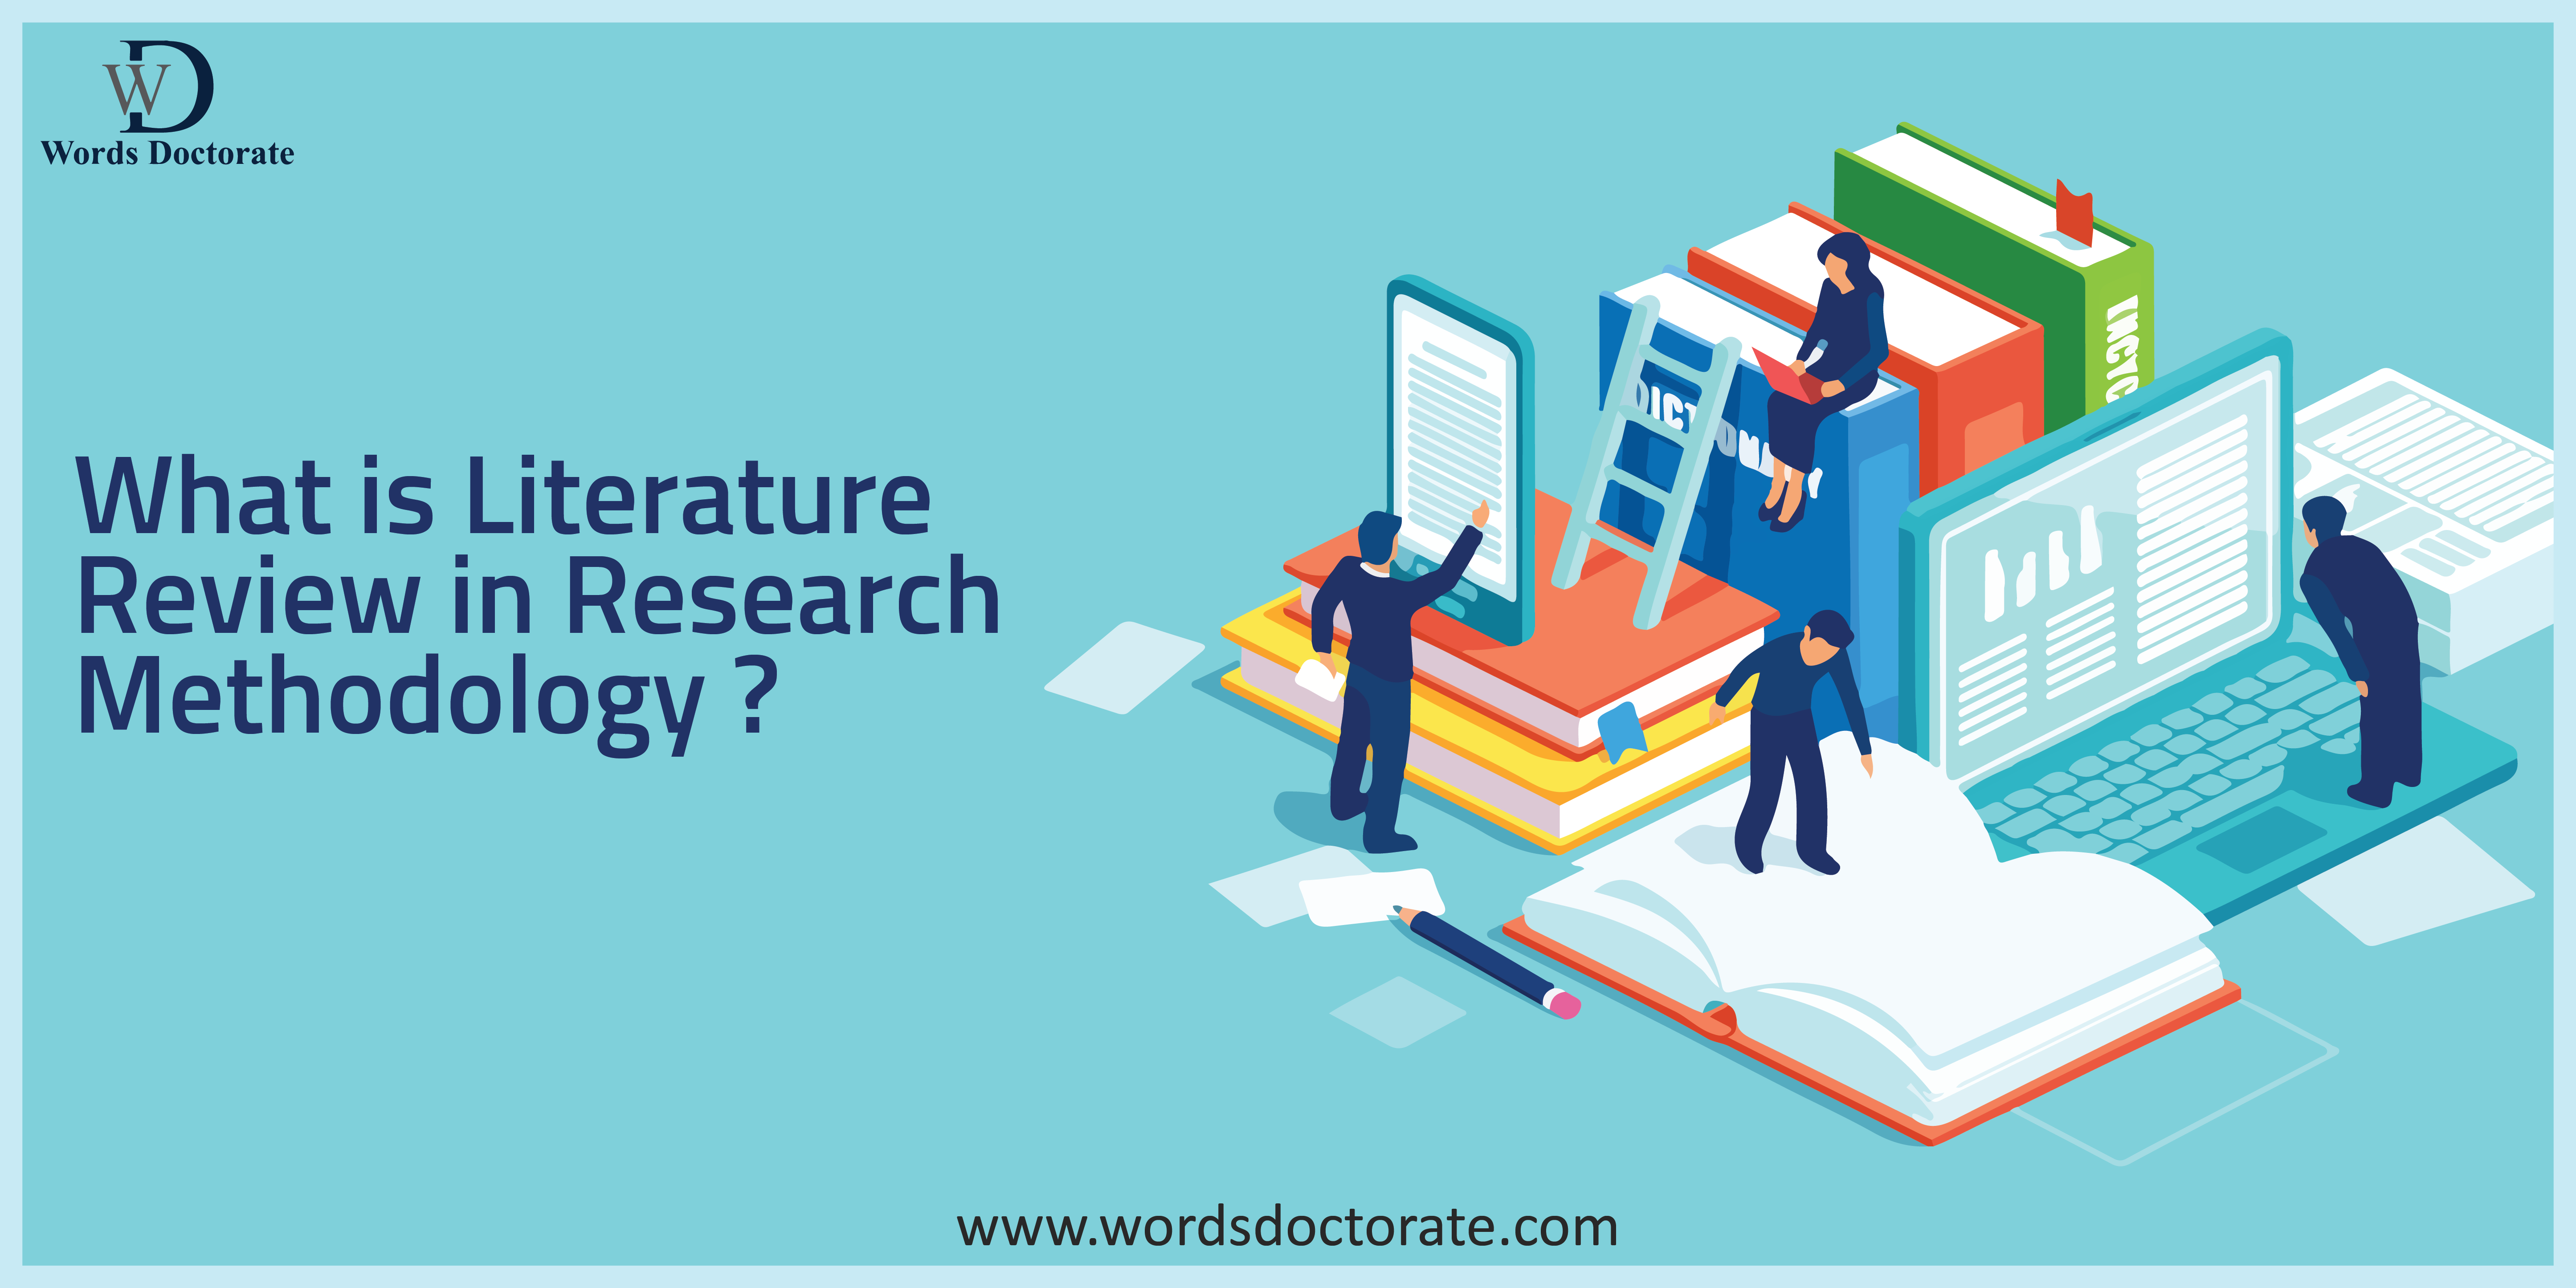 uses of literature review in research methodology